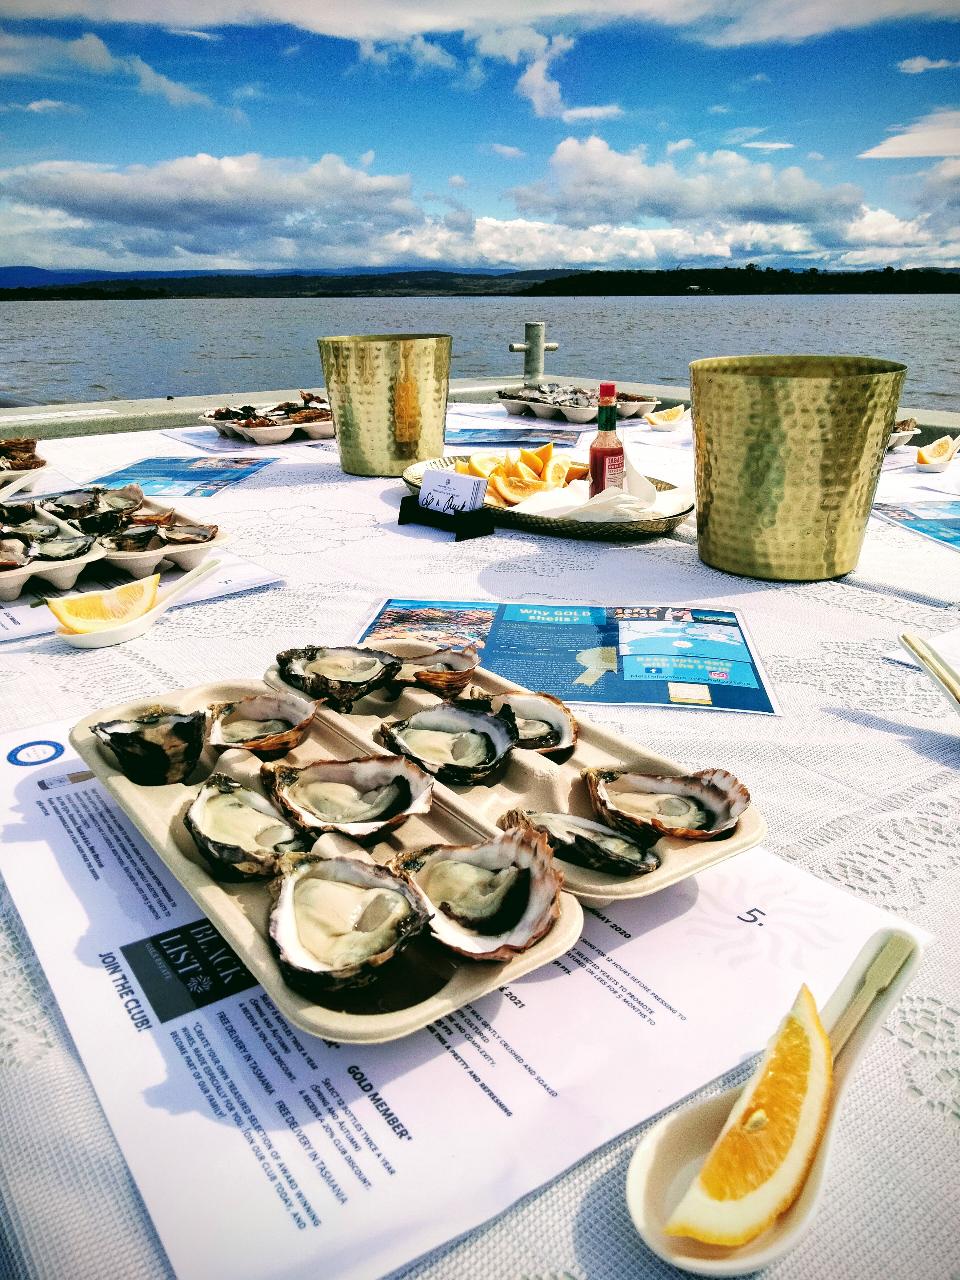 OYSTER FARM SHUCK AND CHAT